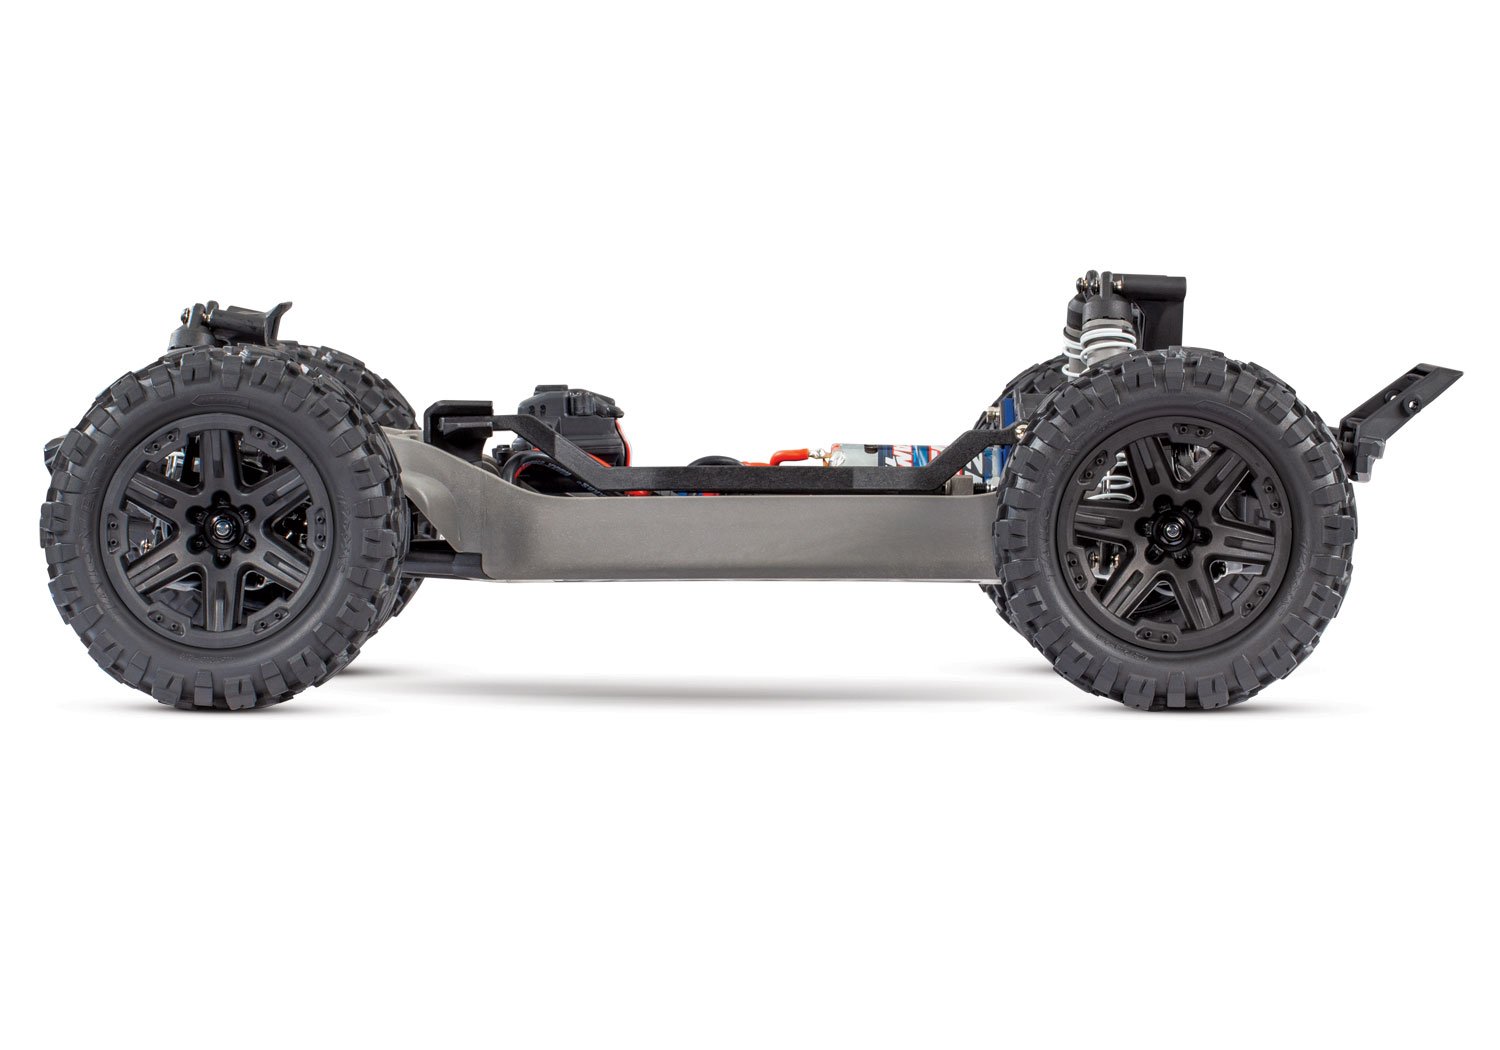 New Low-CG Chassis